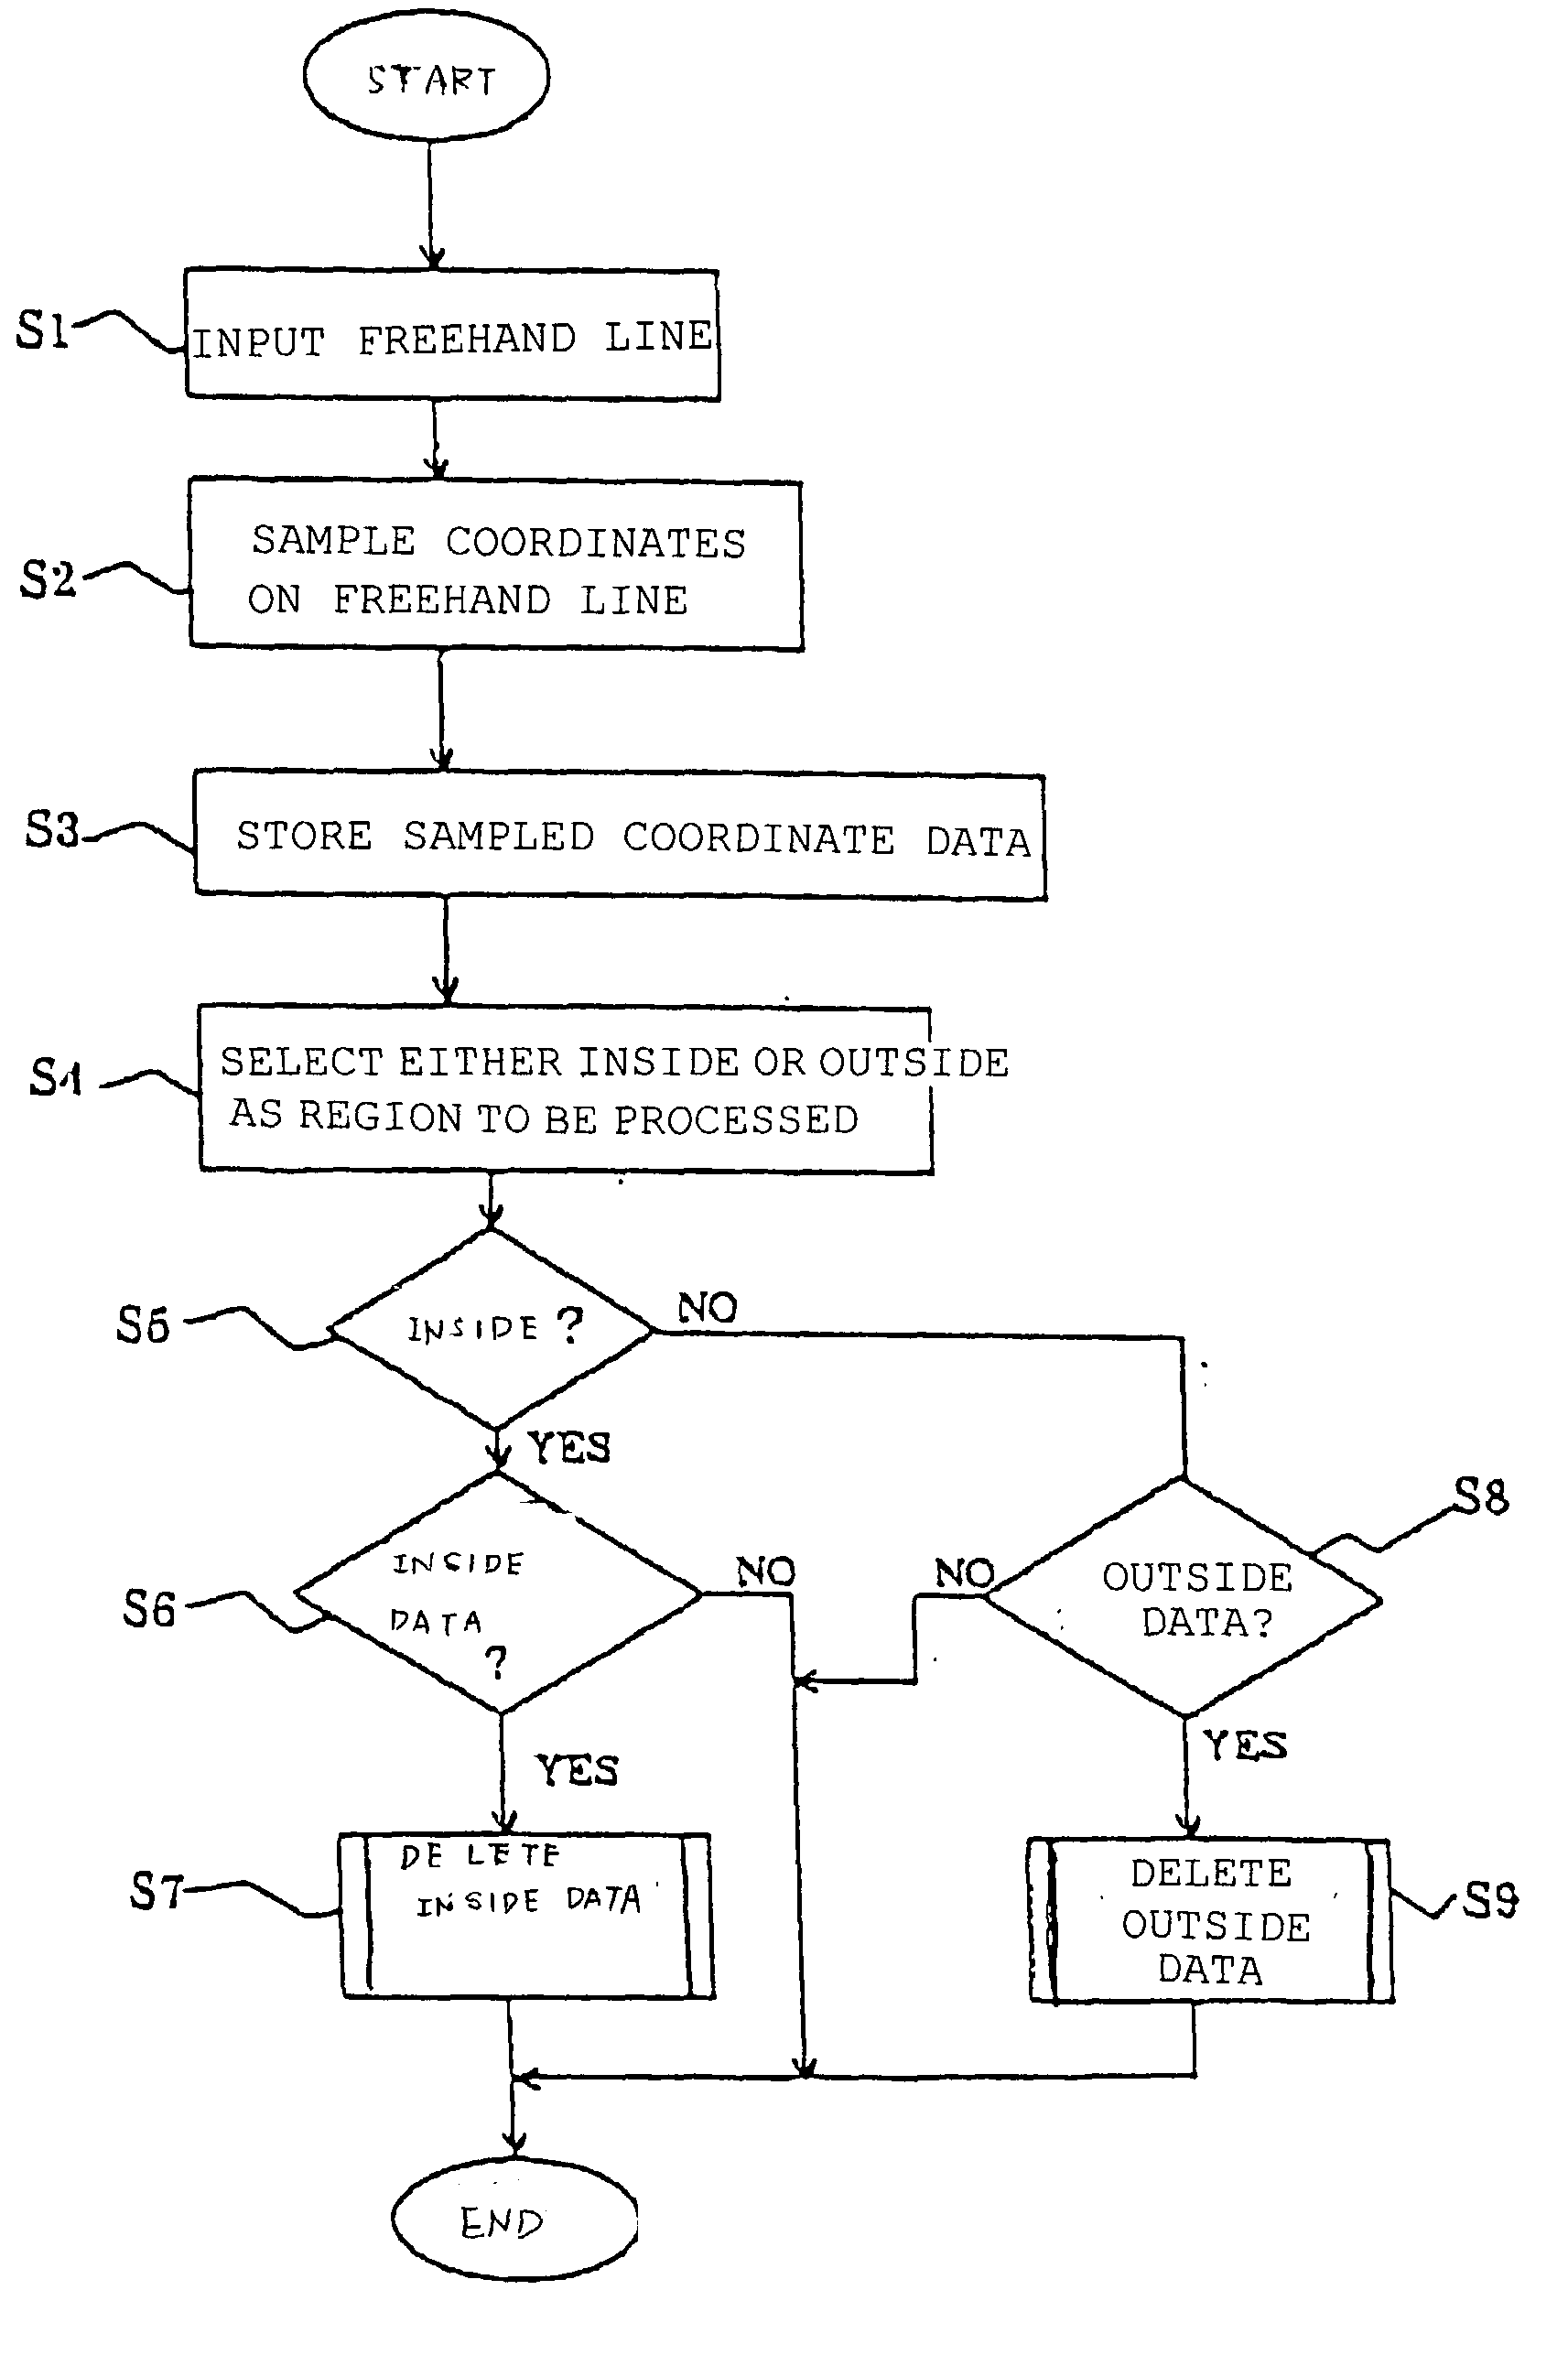 Image processing apparatus, display apparatus with touch panel, image processing method and computer program